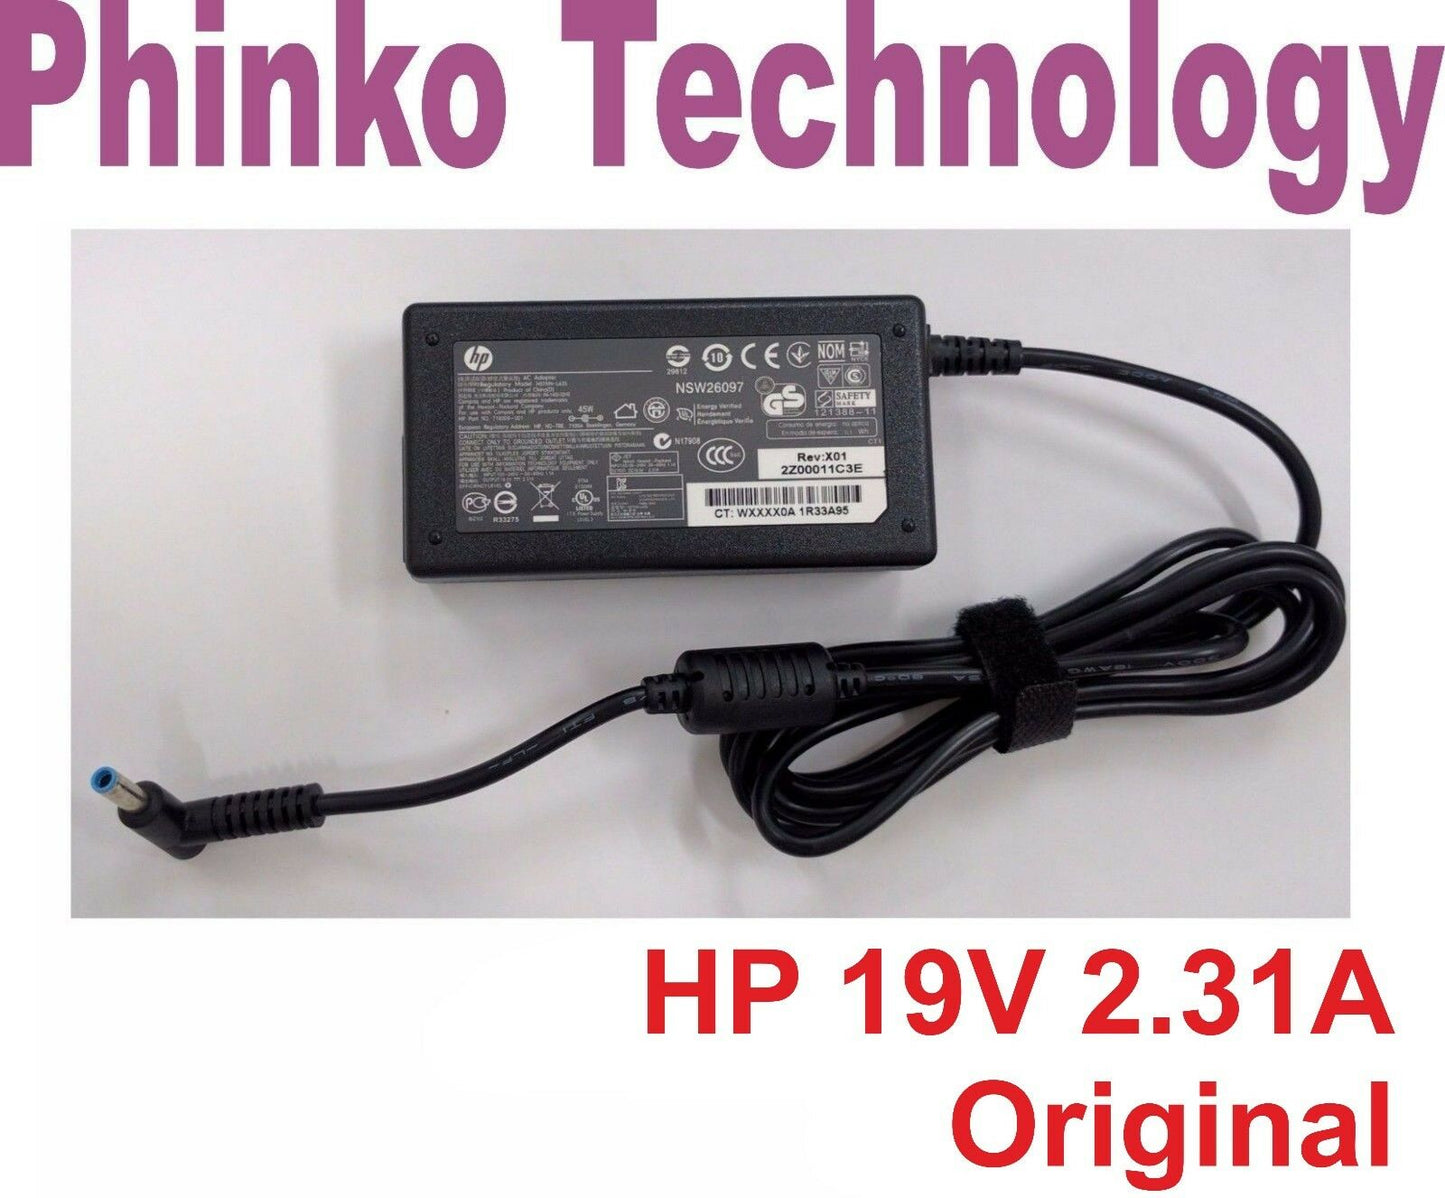 Original Genuine Adapter Charger for HP 255 840 850 G3 355-G2 ,PROBOOK 450 G5